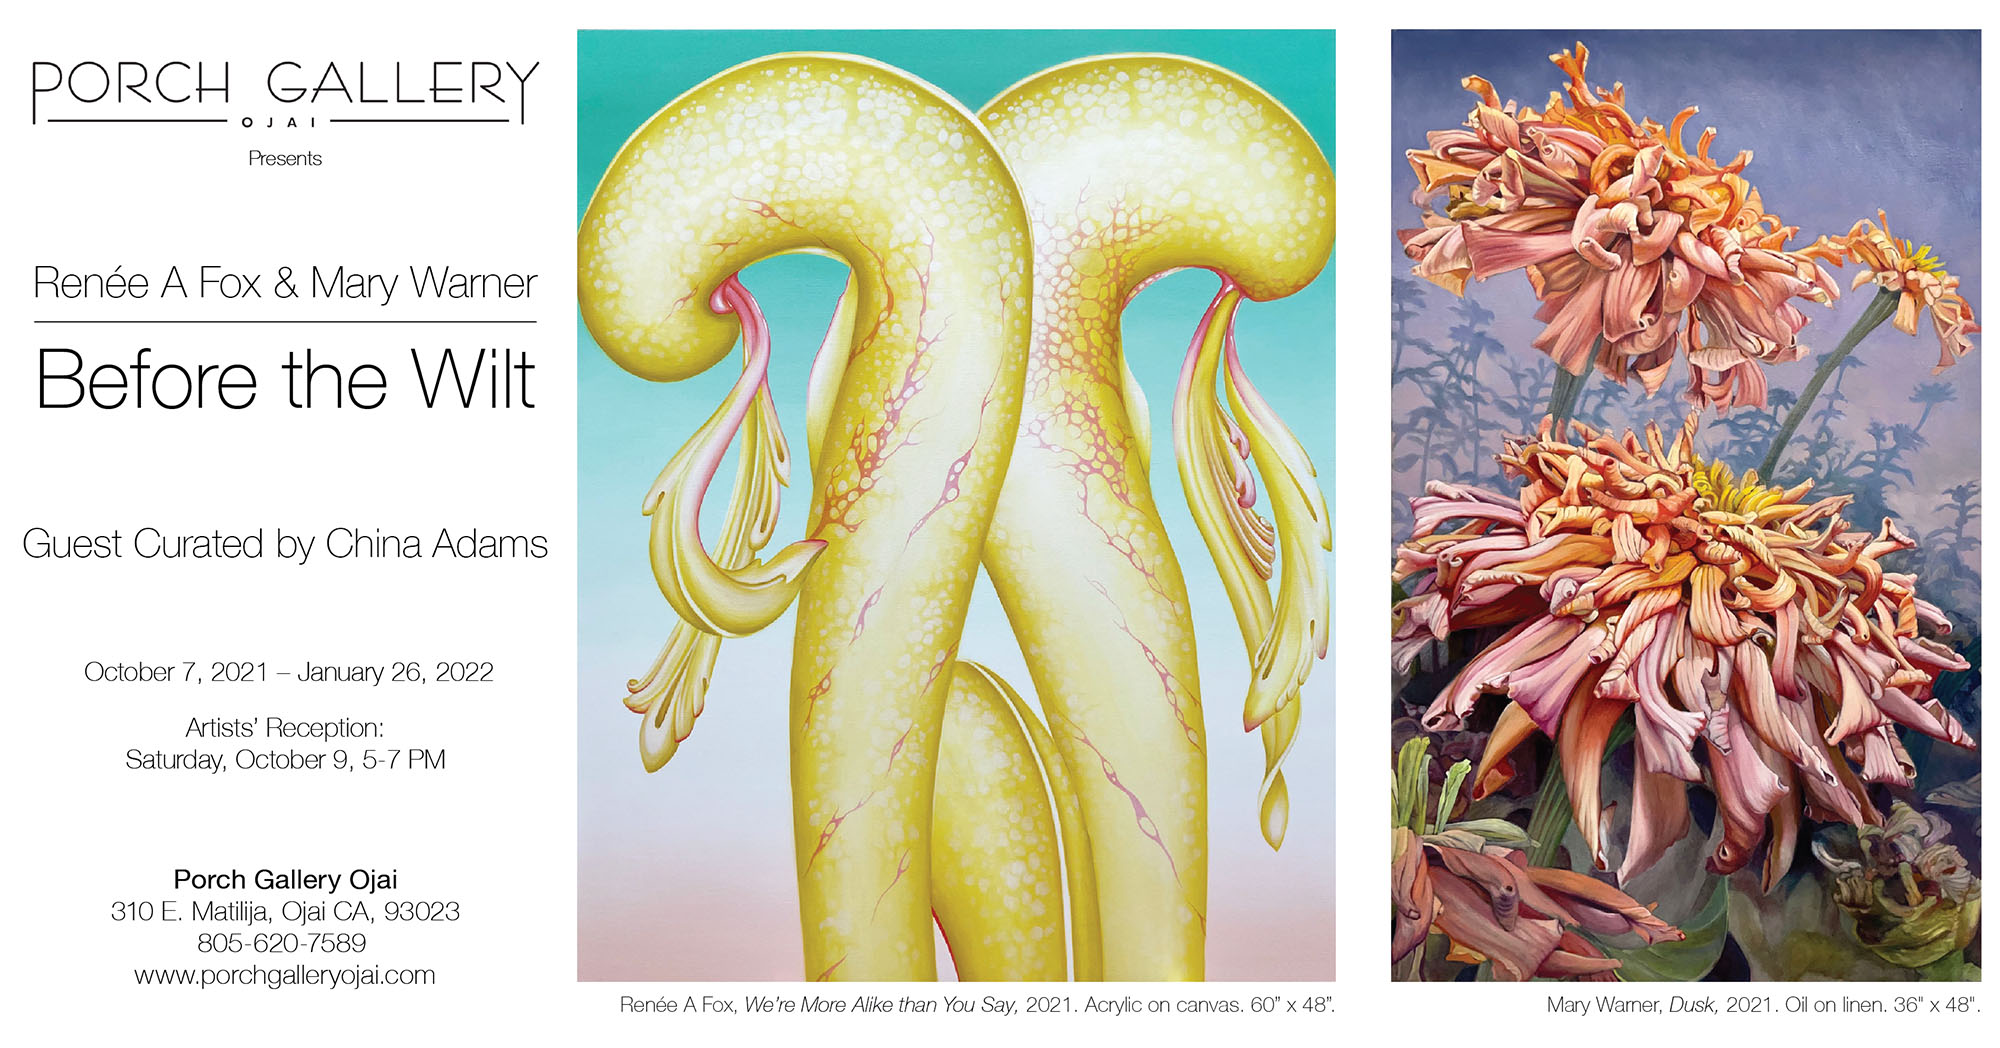 Before the Wilt, Mary Warner at the Porch Gallery